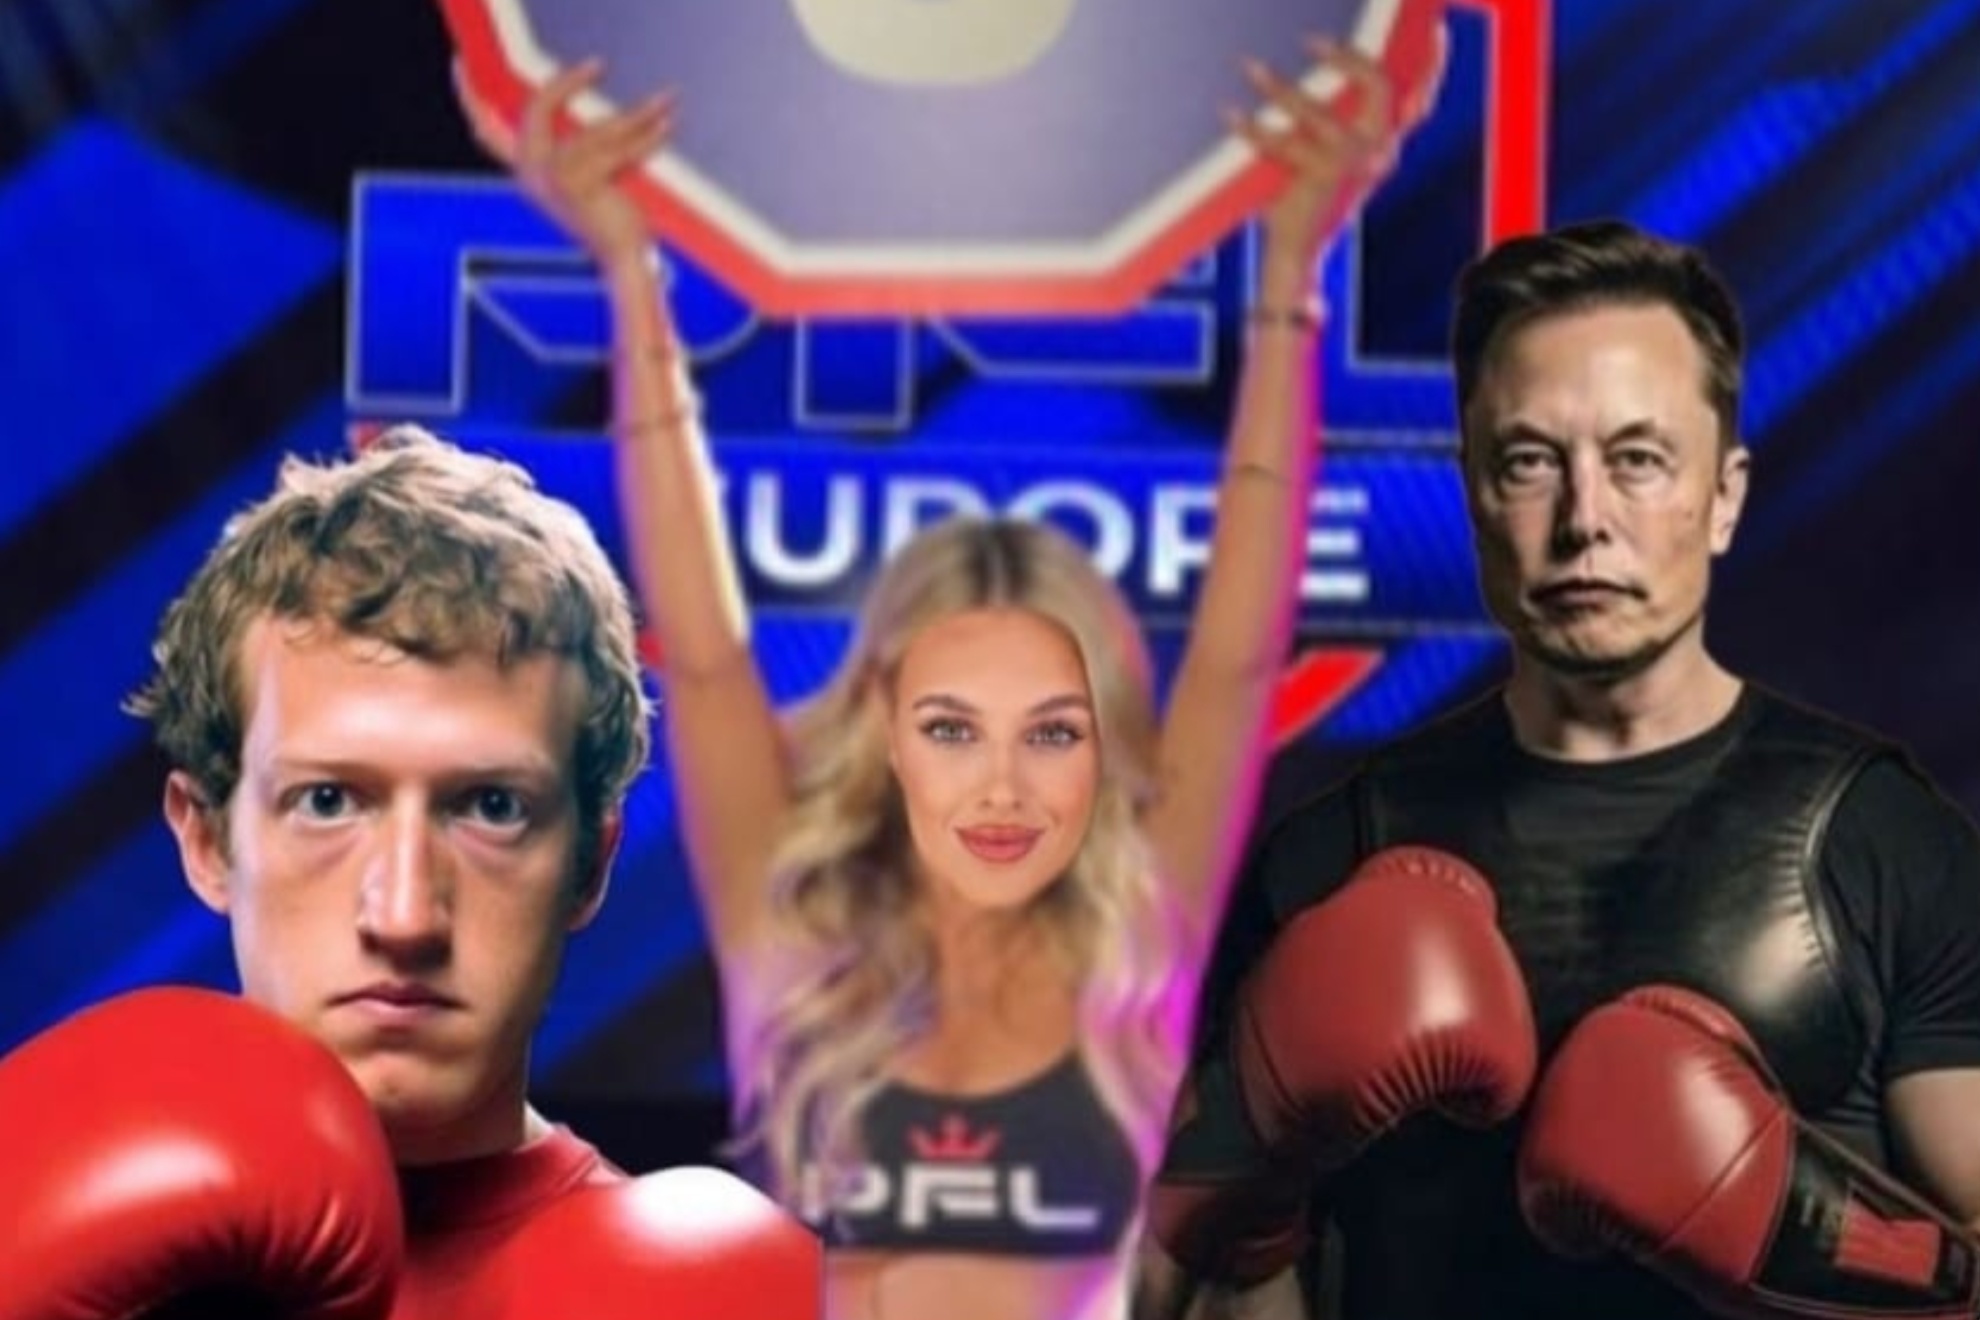 Veronika Rajek (center) made an 'offer' to Zuckerberg (left) and Musk (right) in Threads.